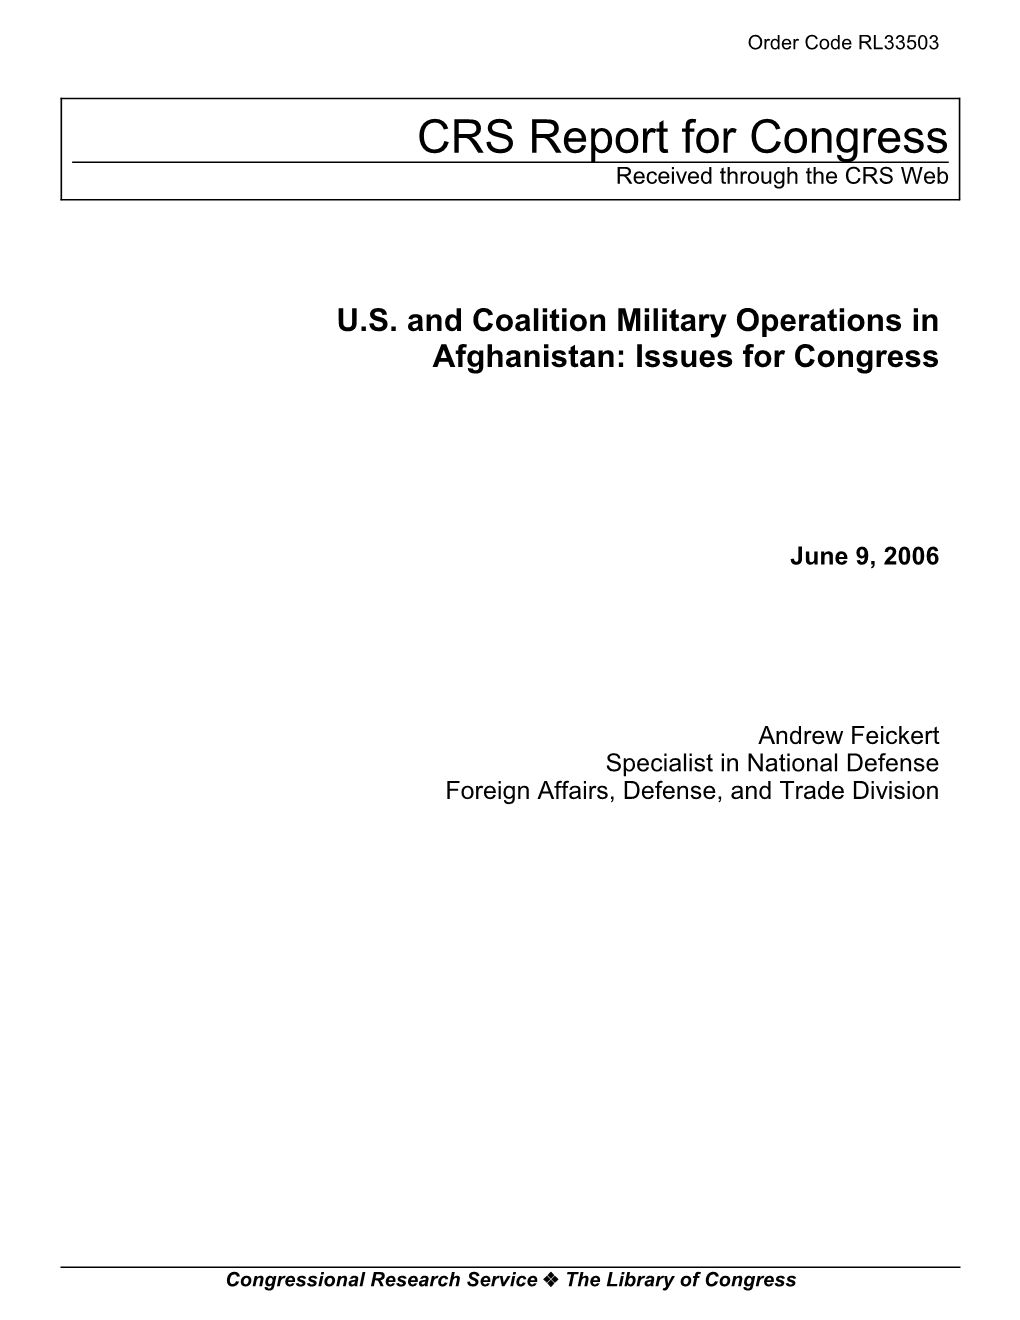 US and Coalition Military Operations in Afghanistan